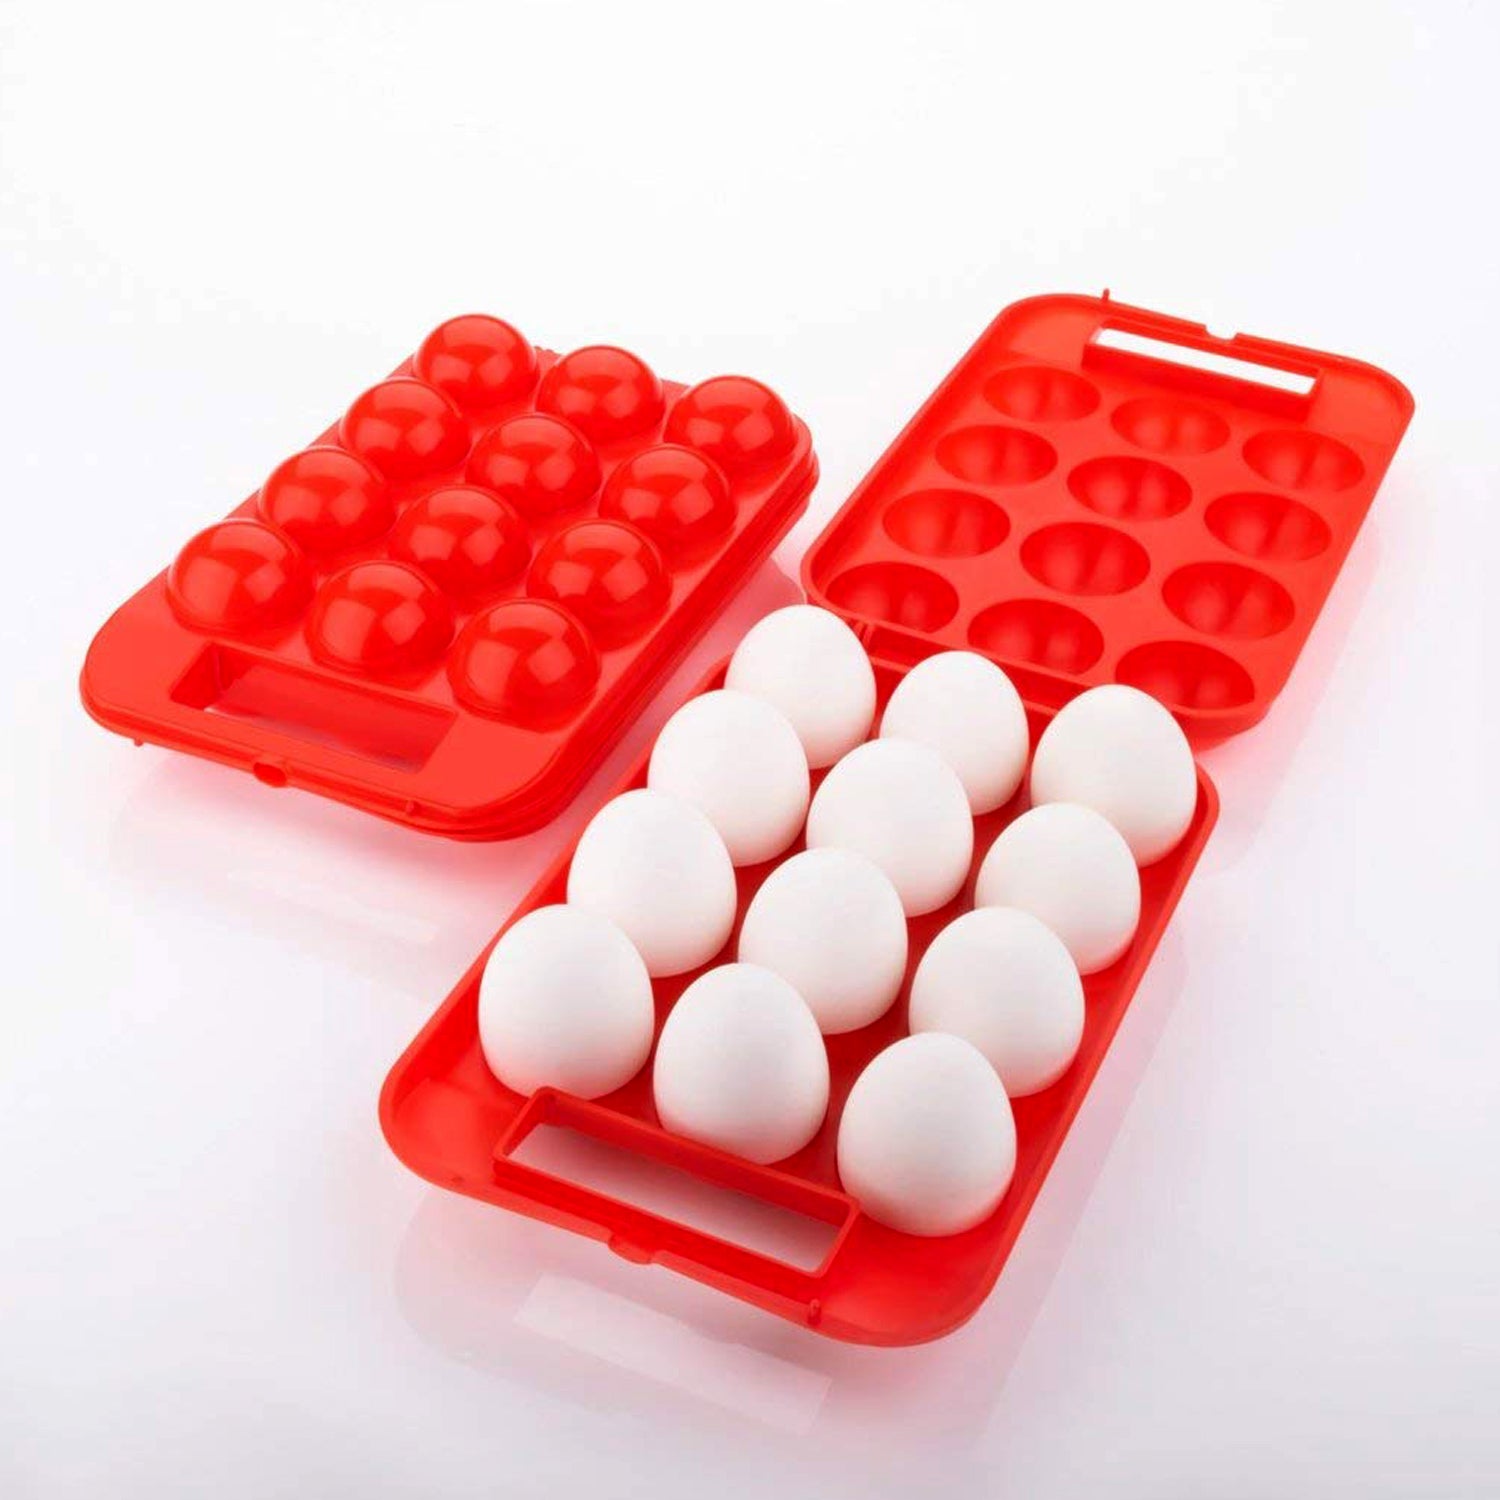 2171 Plastic Egg Carry Tray Holder Carrier Storage Box - India, 0.501 kgs